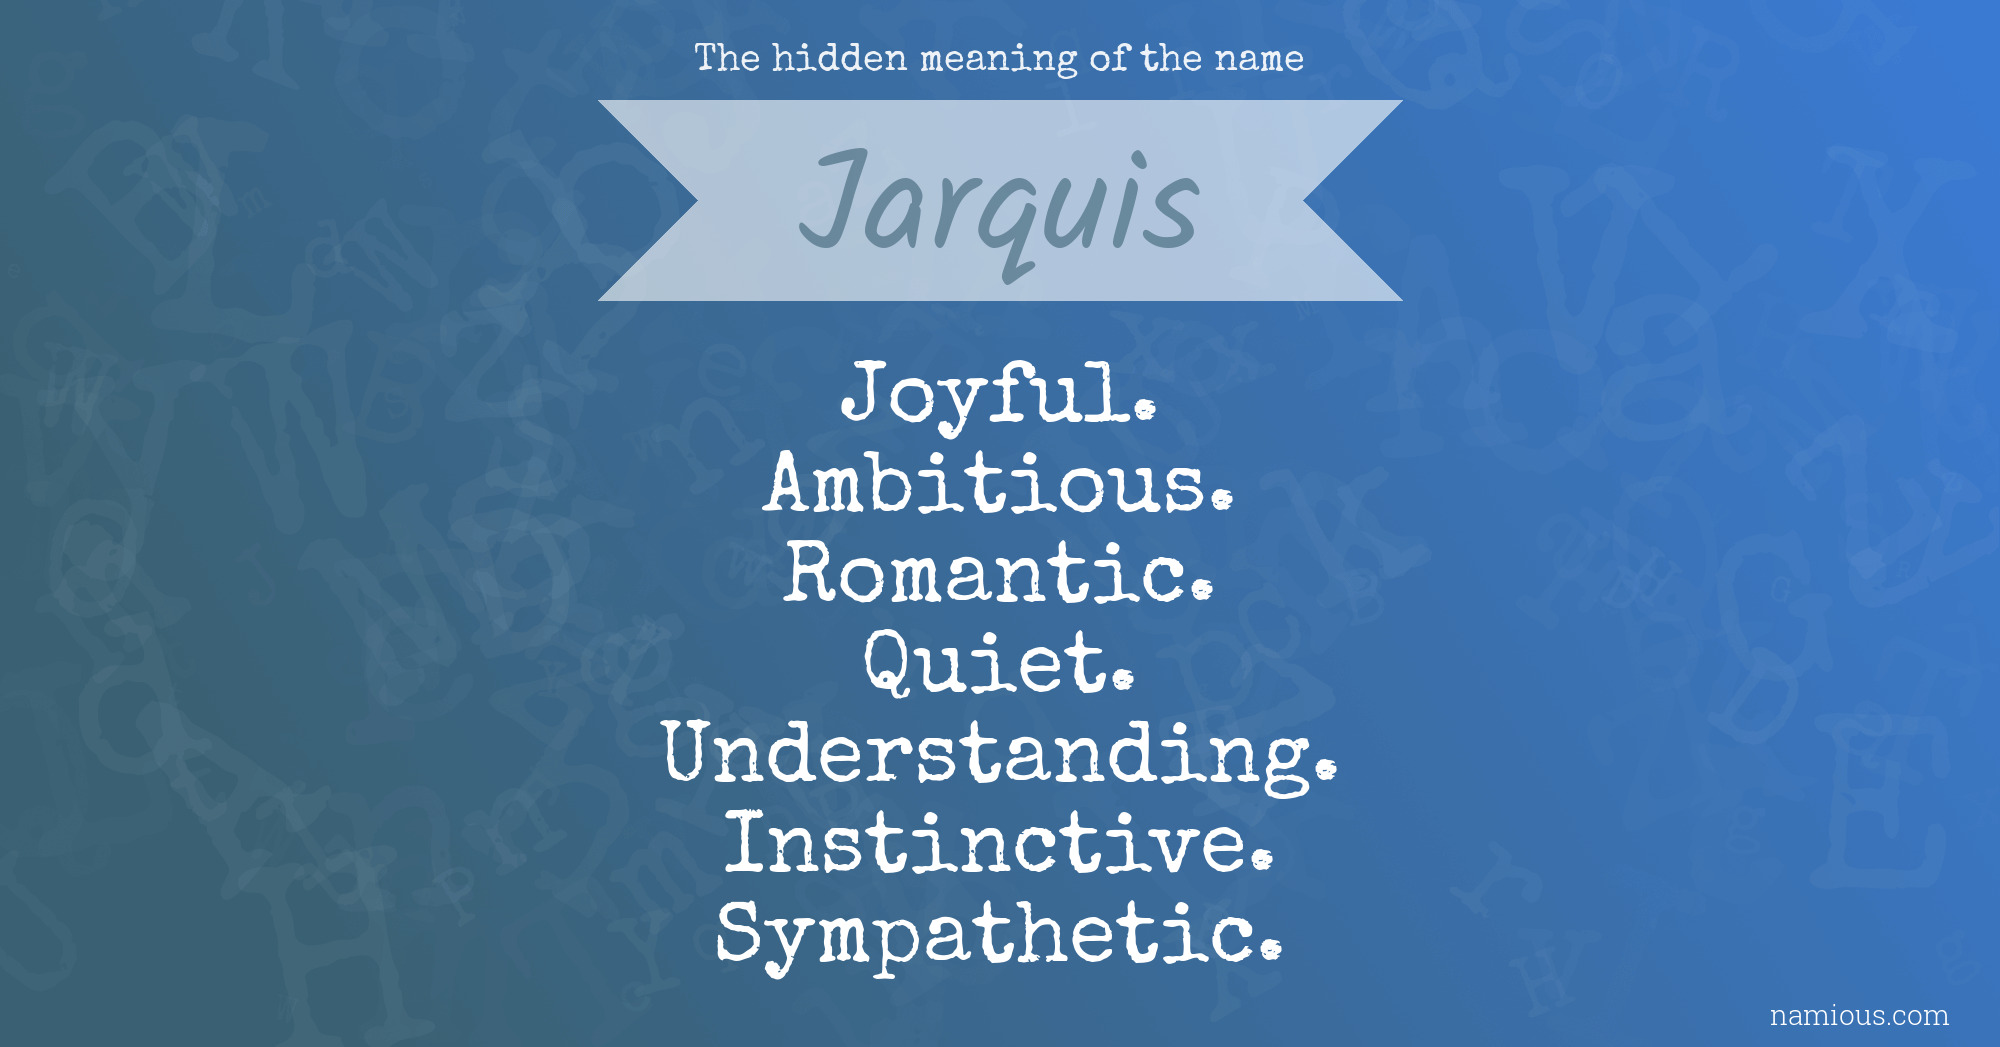 The hidden meaning of the name Jarquis